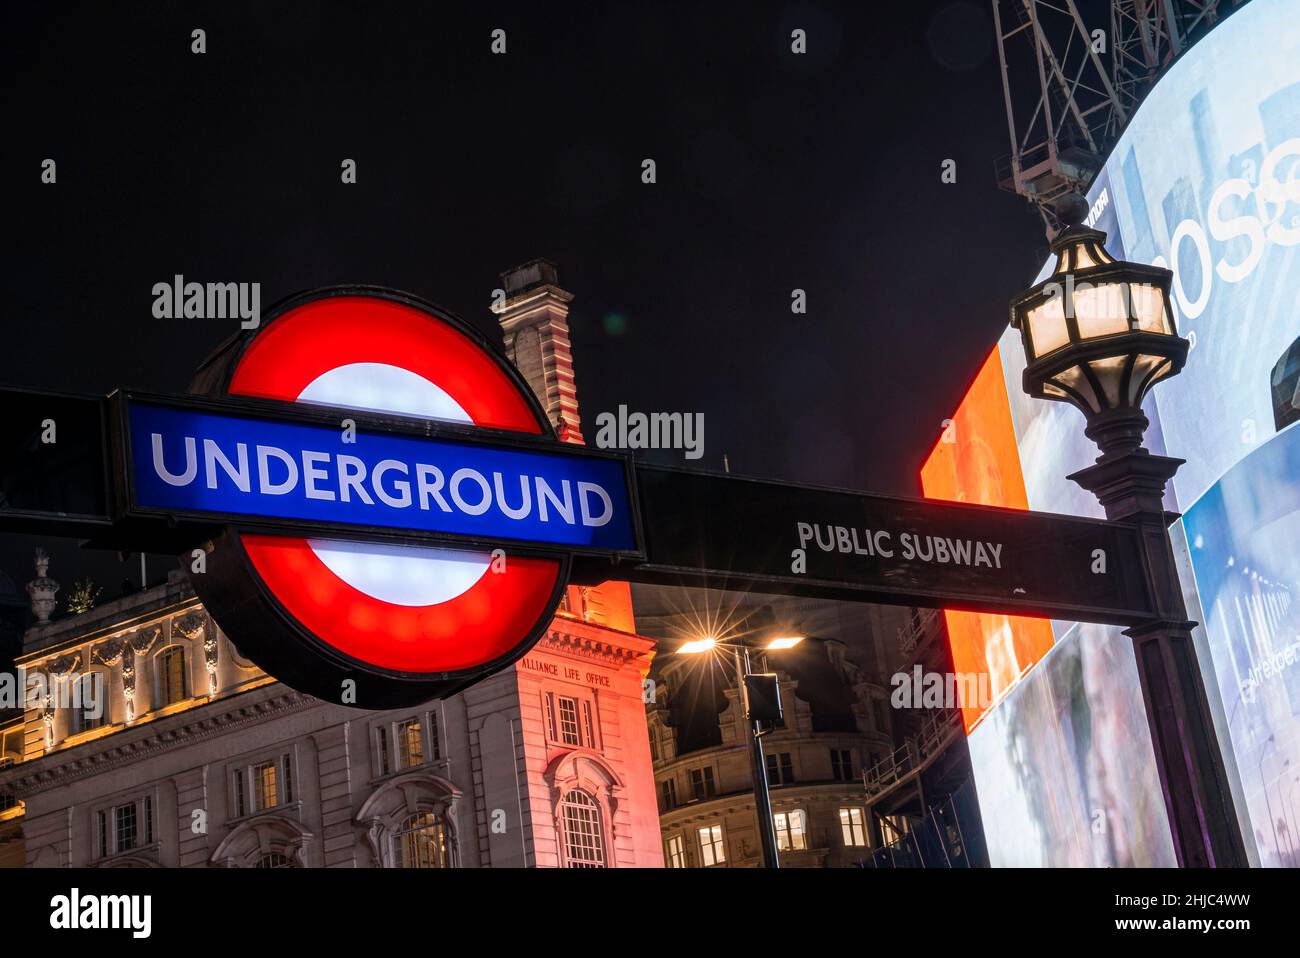 Famous London public underground subway sign with street lamps Stock Photo